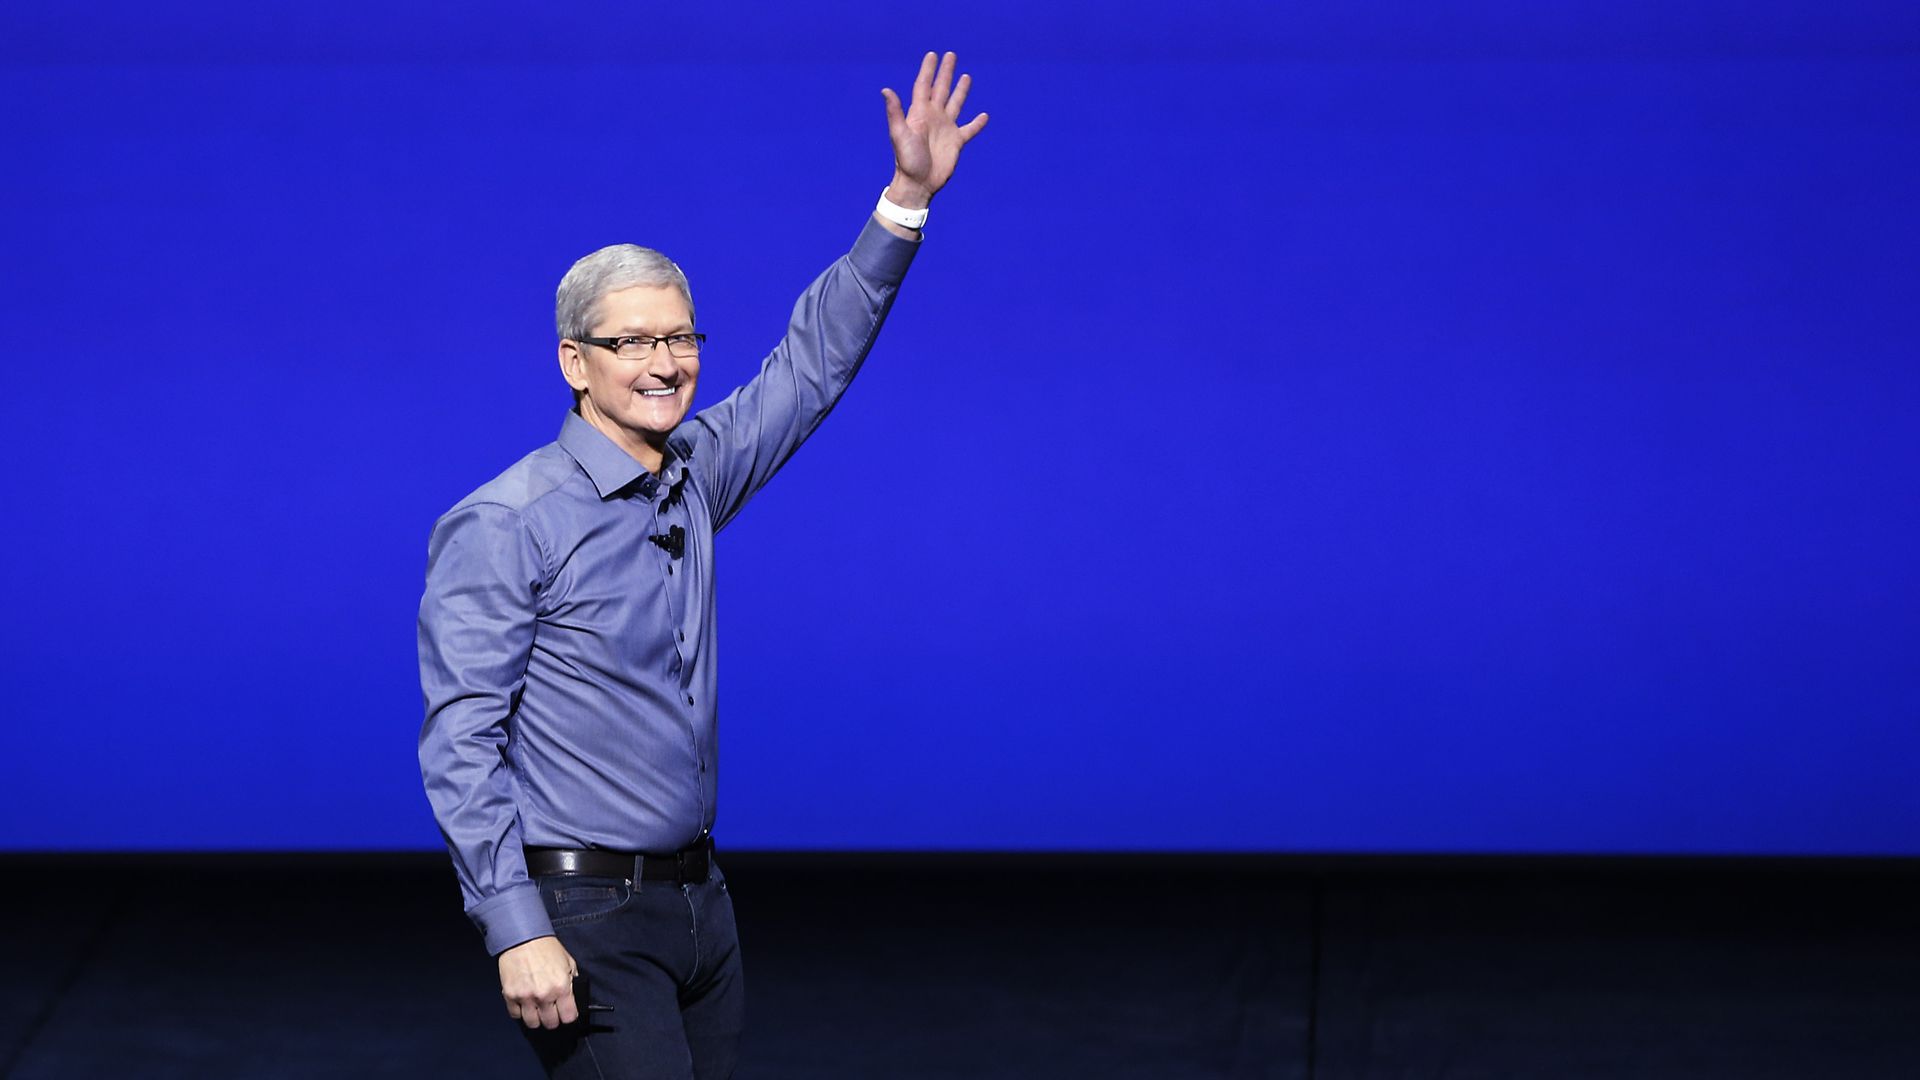 Tim Cook in front of a blue backdrop